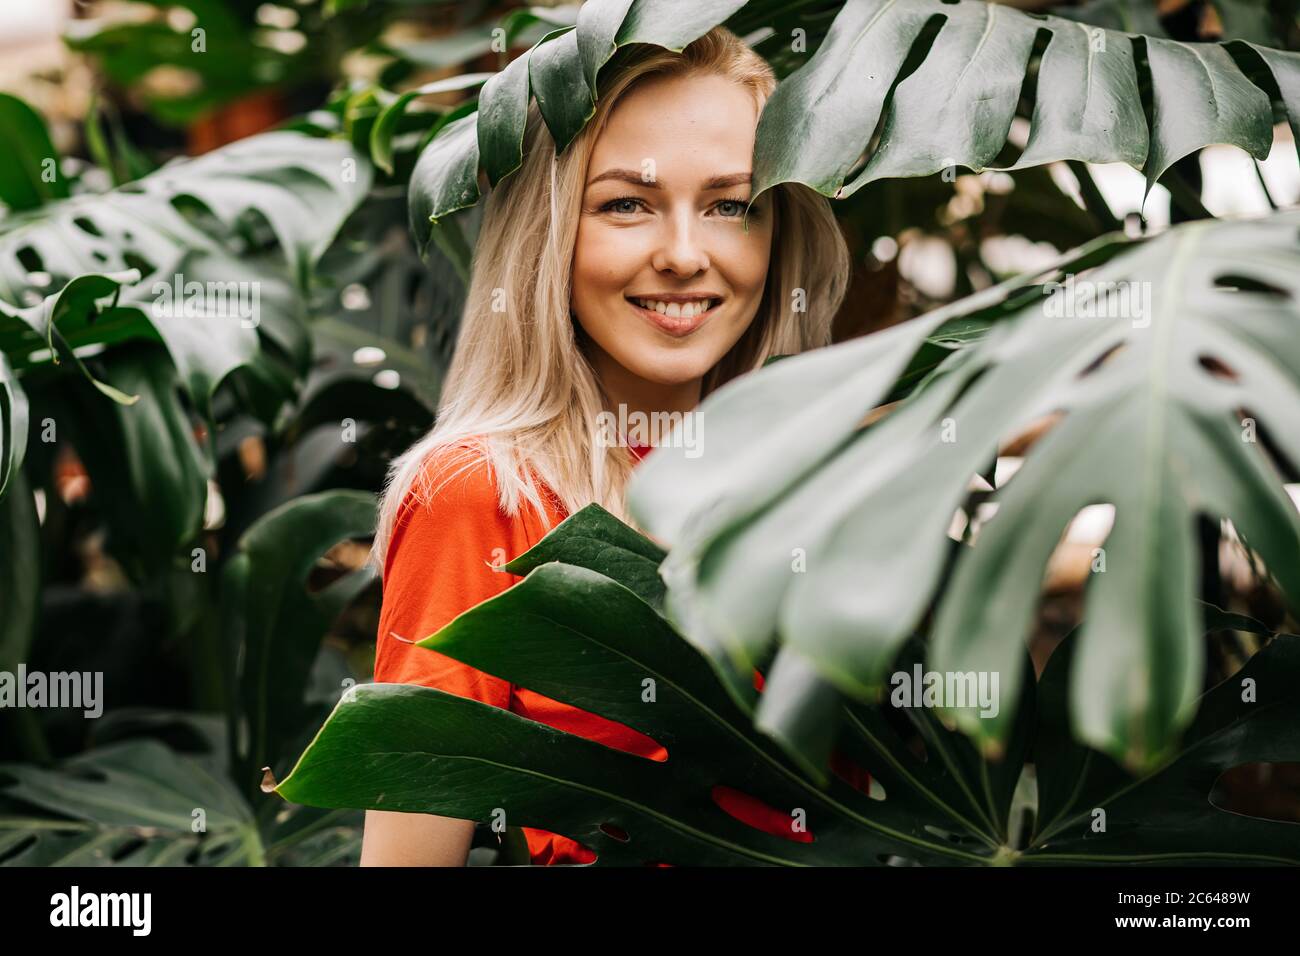 Cheerful charming caucasian blonde woman wearing red t shirt enjoying time in forest, smiling with white teeth standing among tropical leaves. Nature Stock Photo